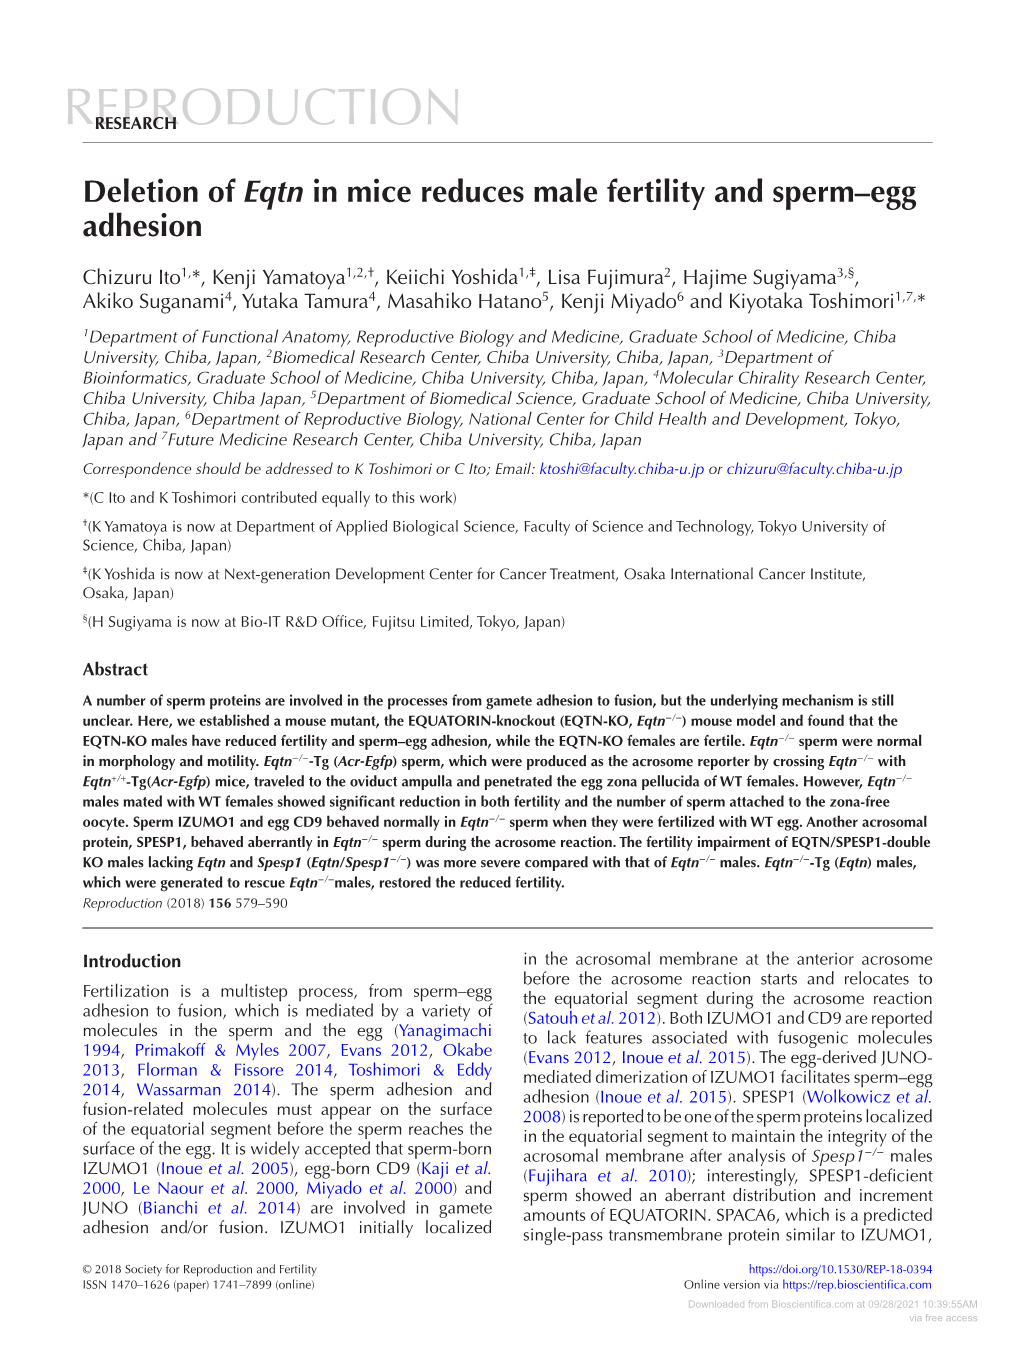 Deletion of Eqtn in Mice Reduces Male Fertility and Sperm–Egg Adhesion